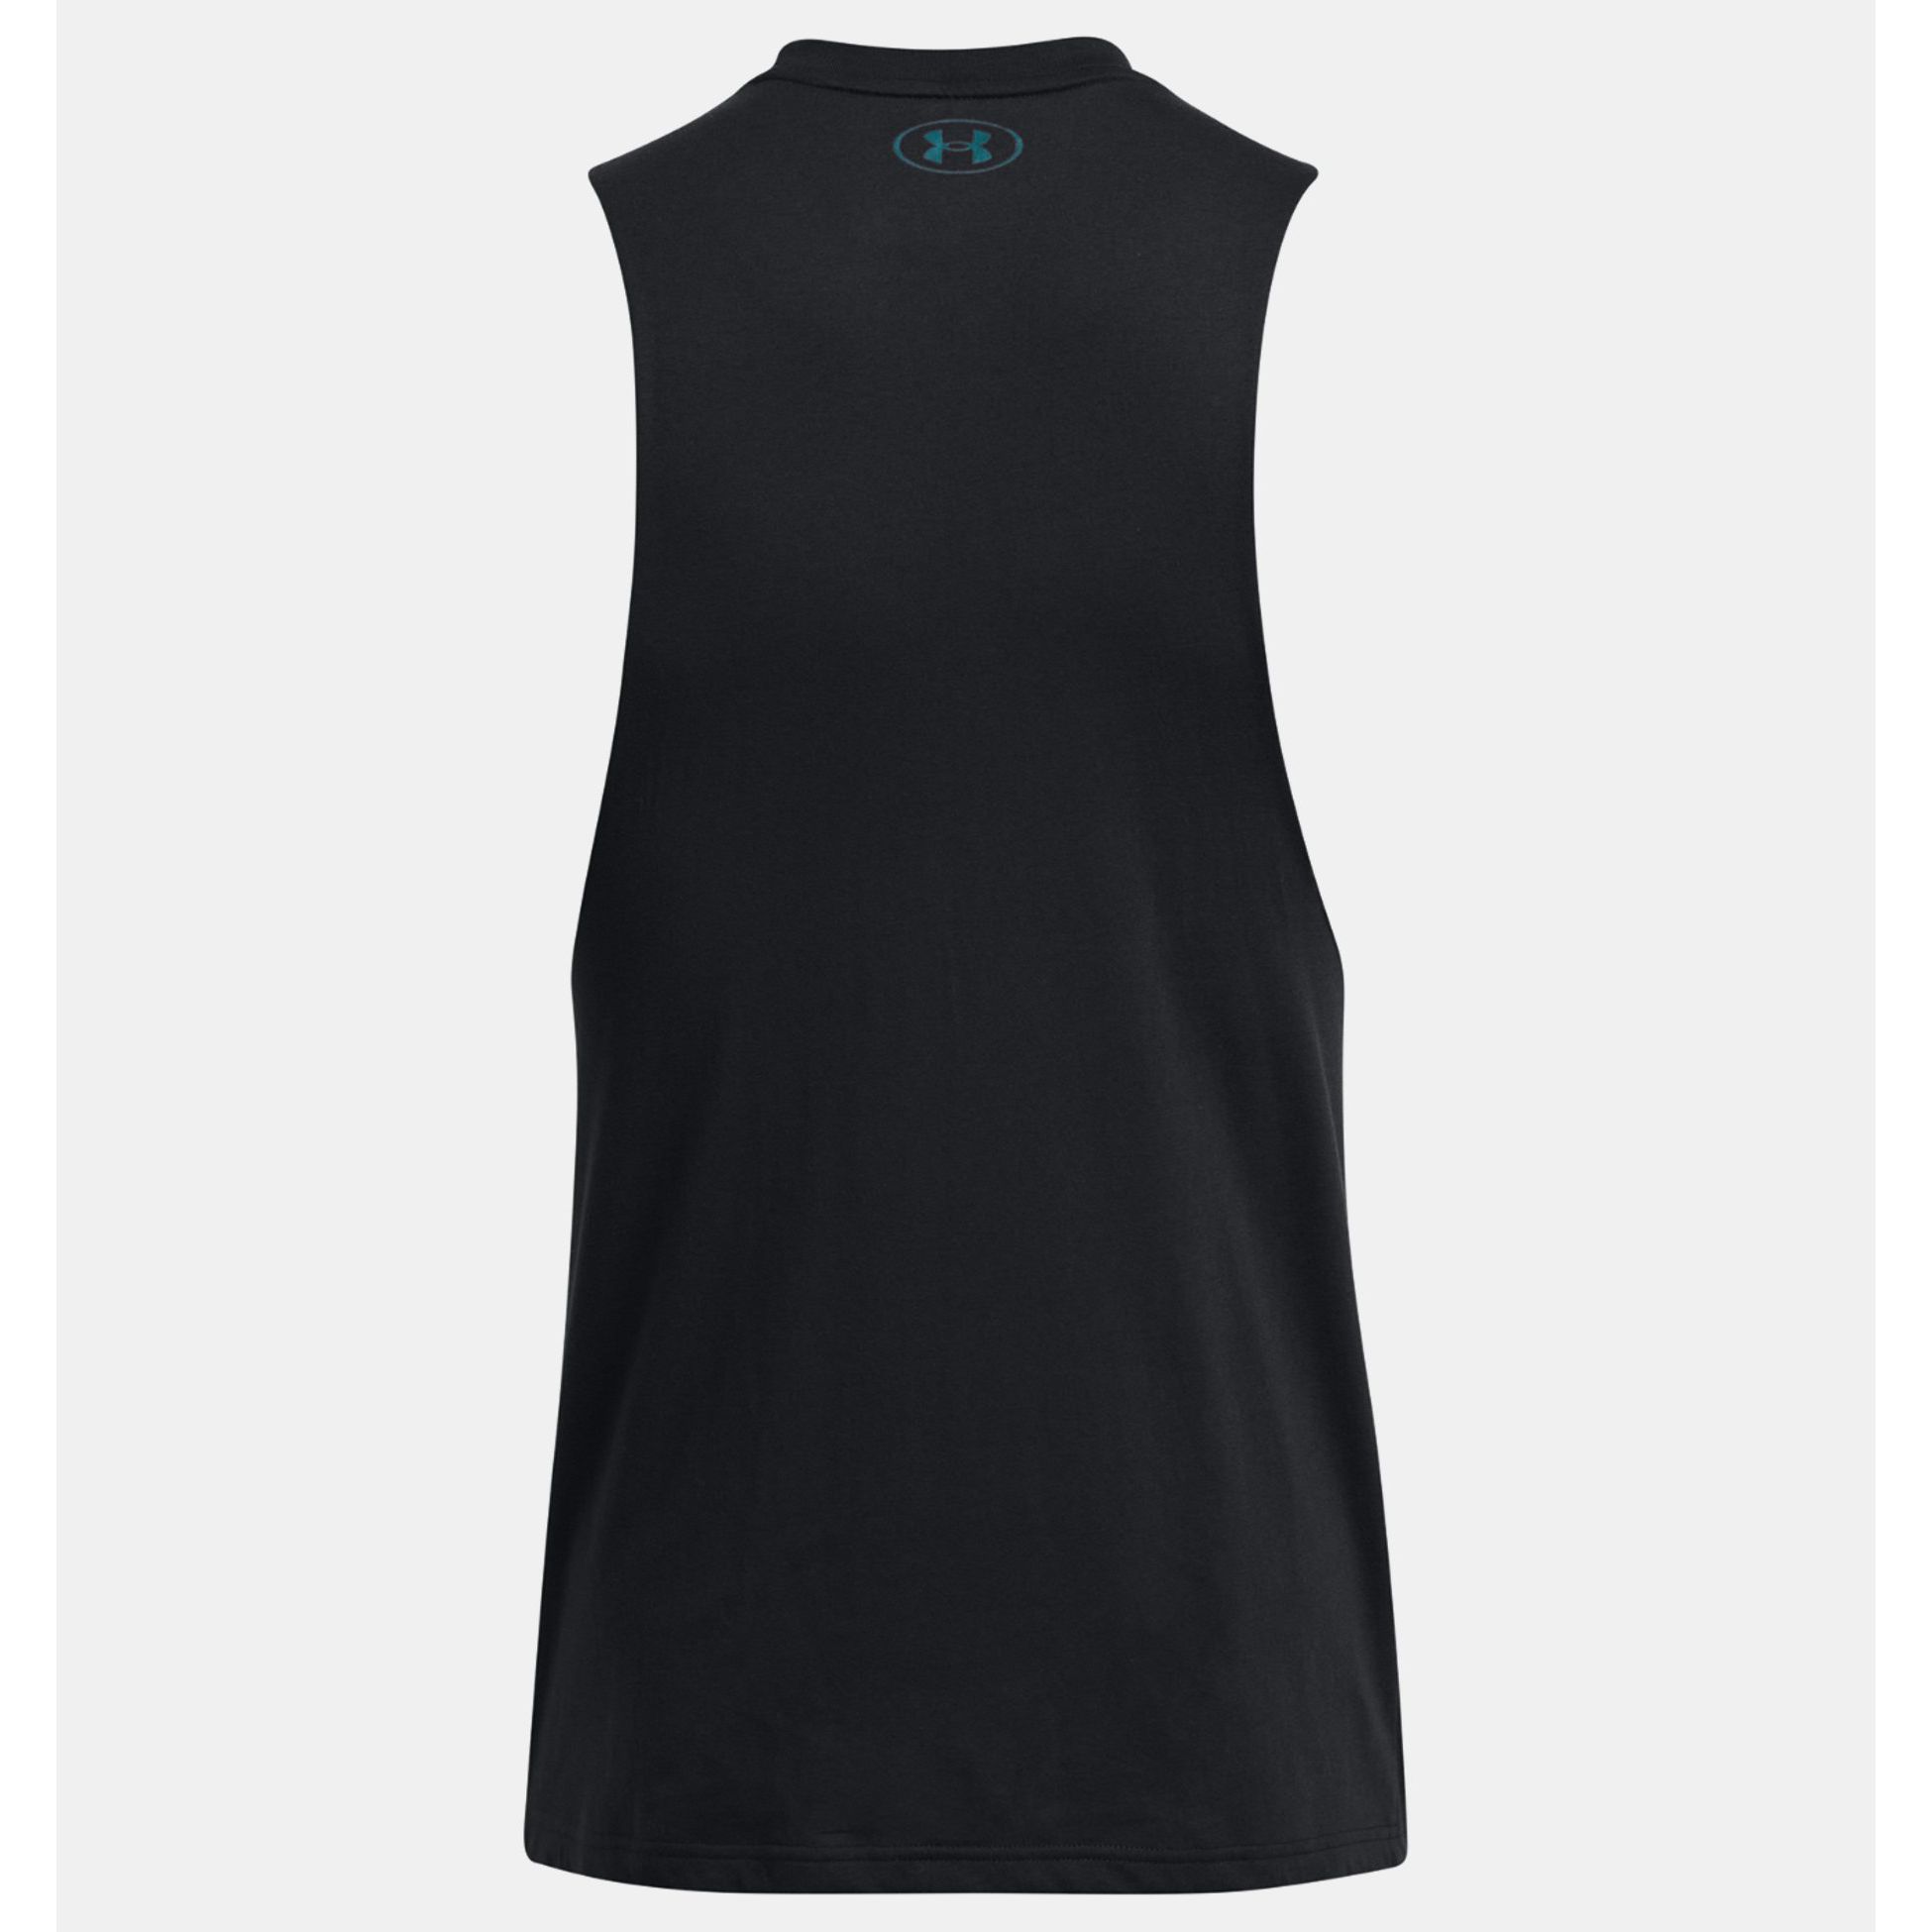 Maiouri -  under armour Project Rock BSR Payoff Tank